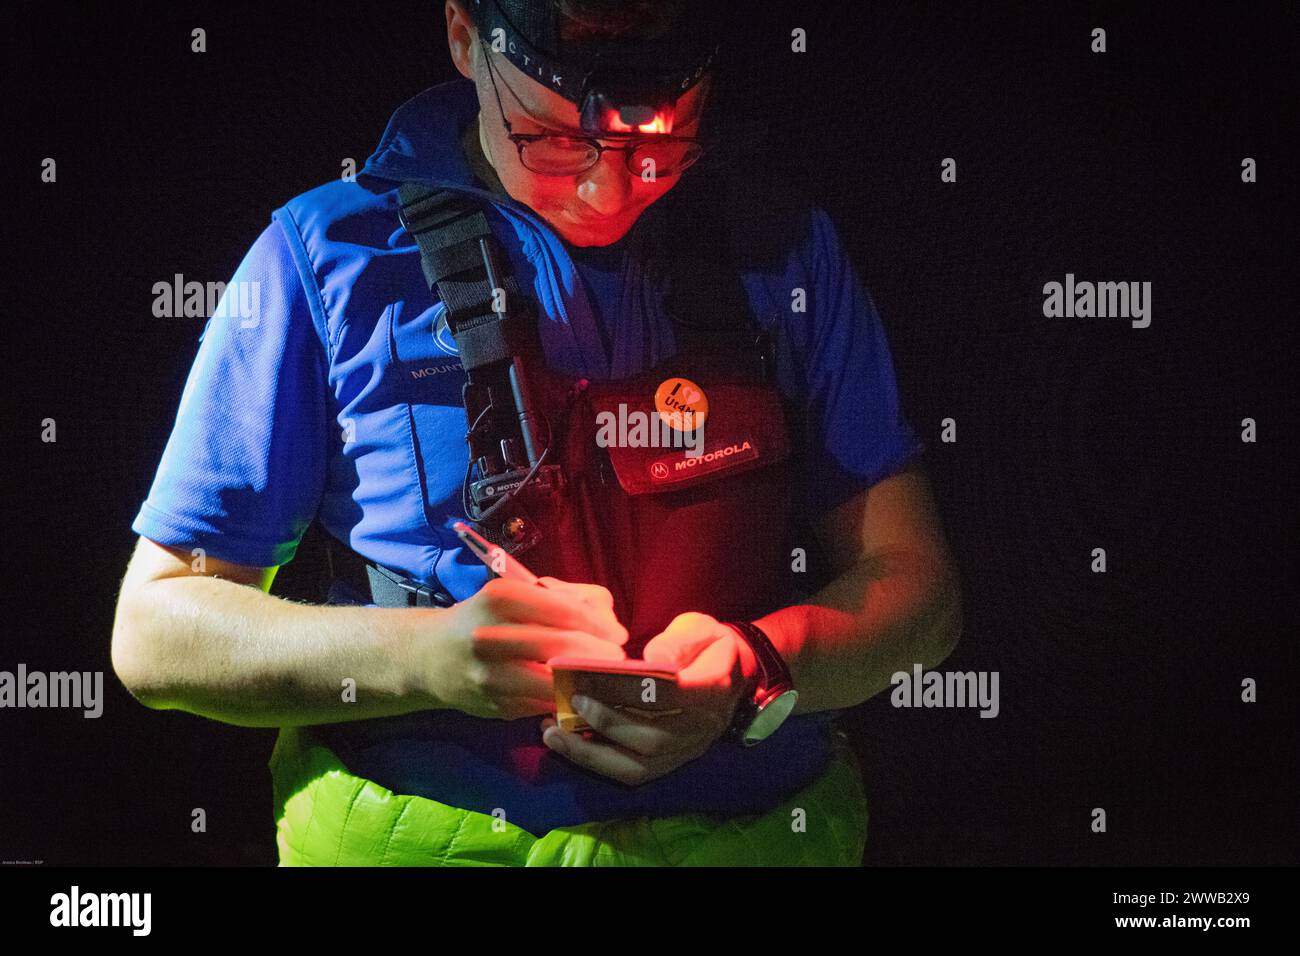 Report on a rescue device specializing in difficult mountain access. Stock Photo